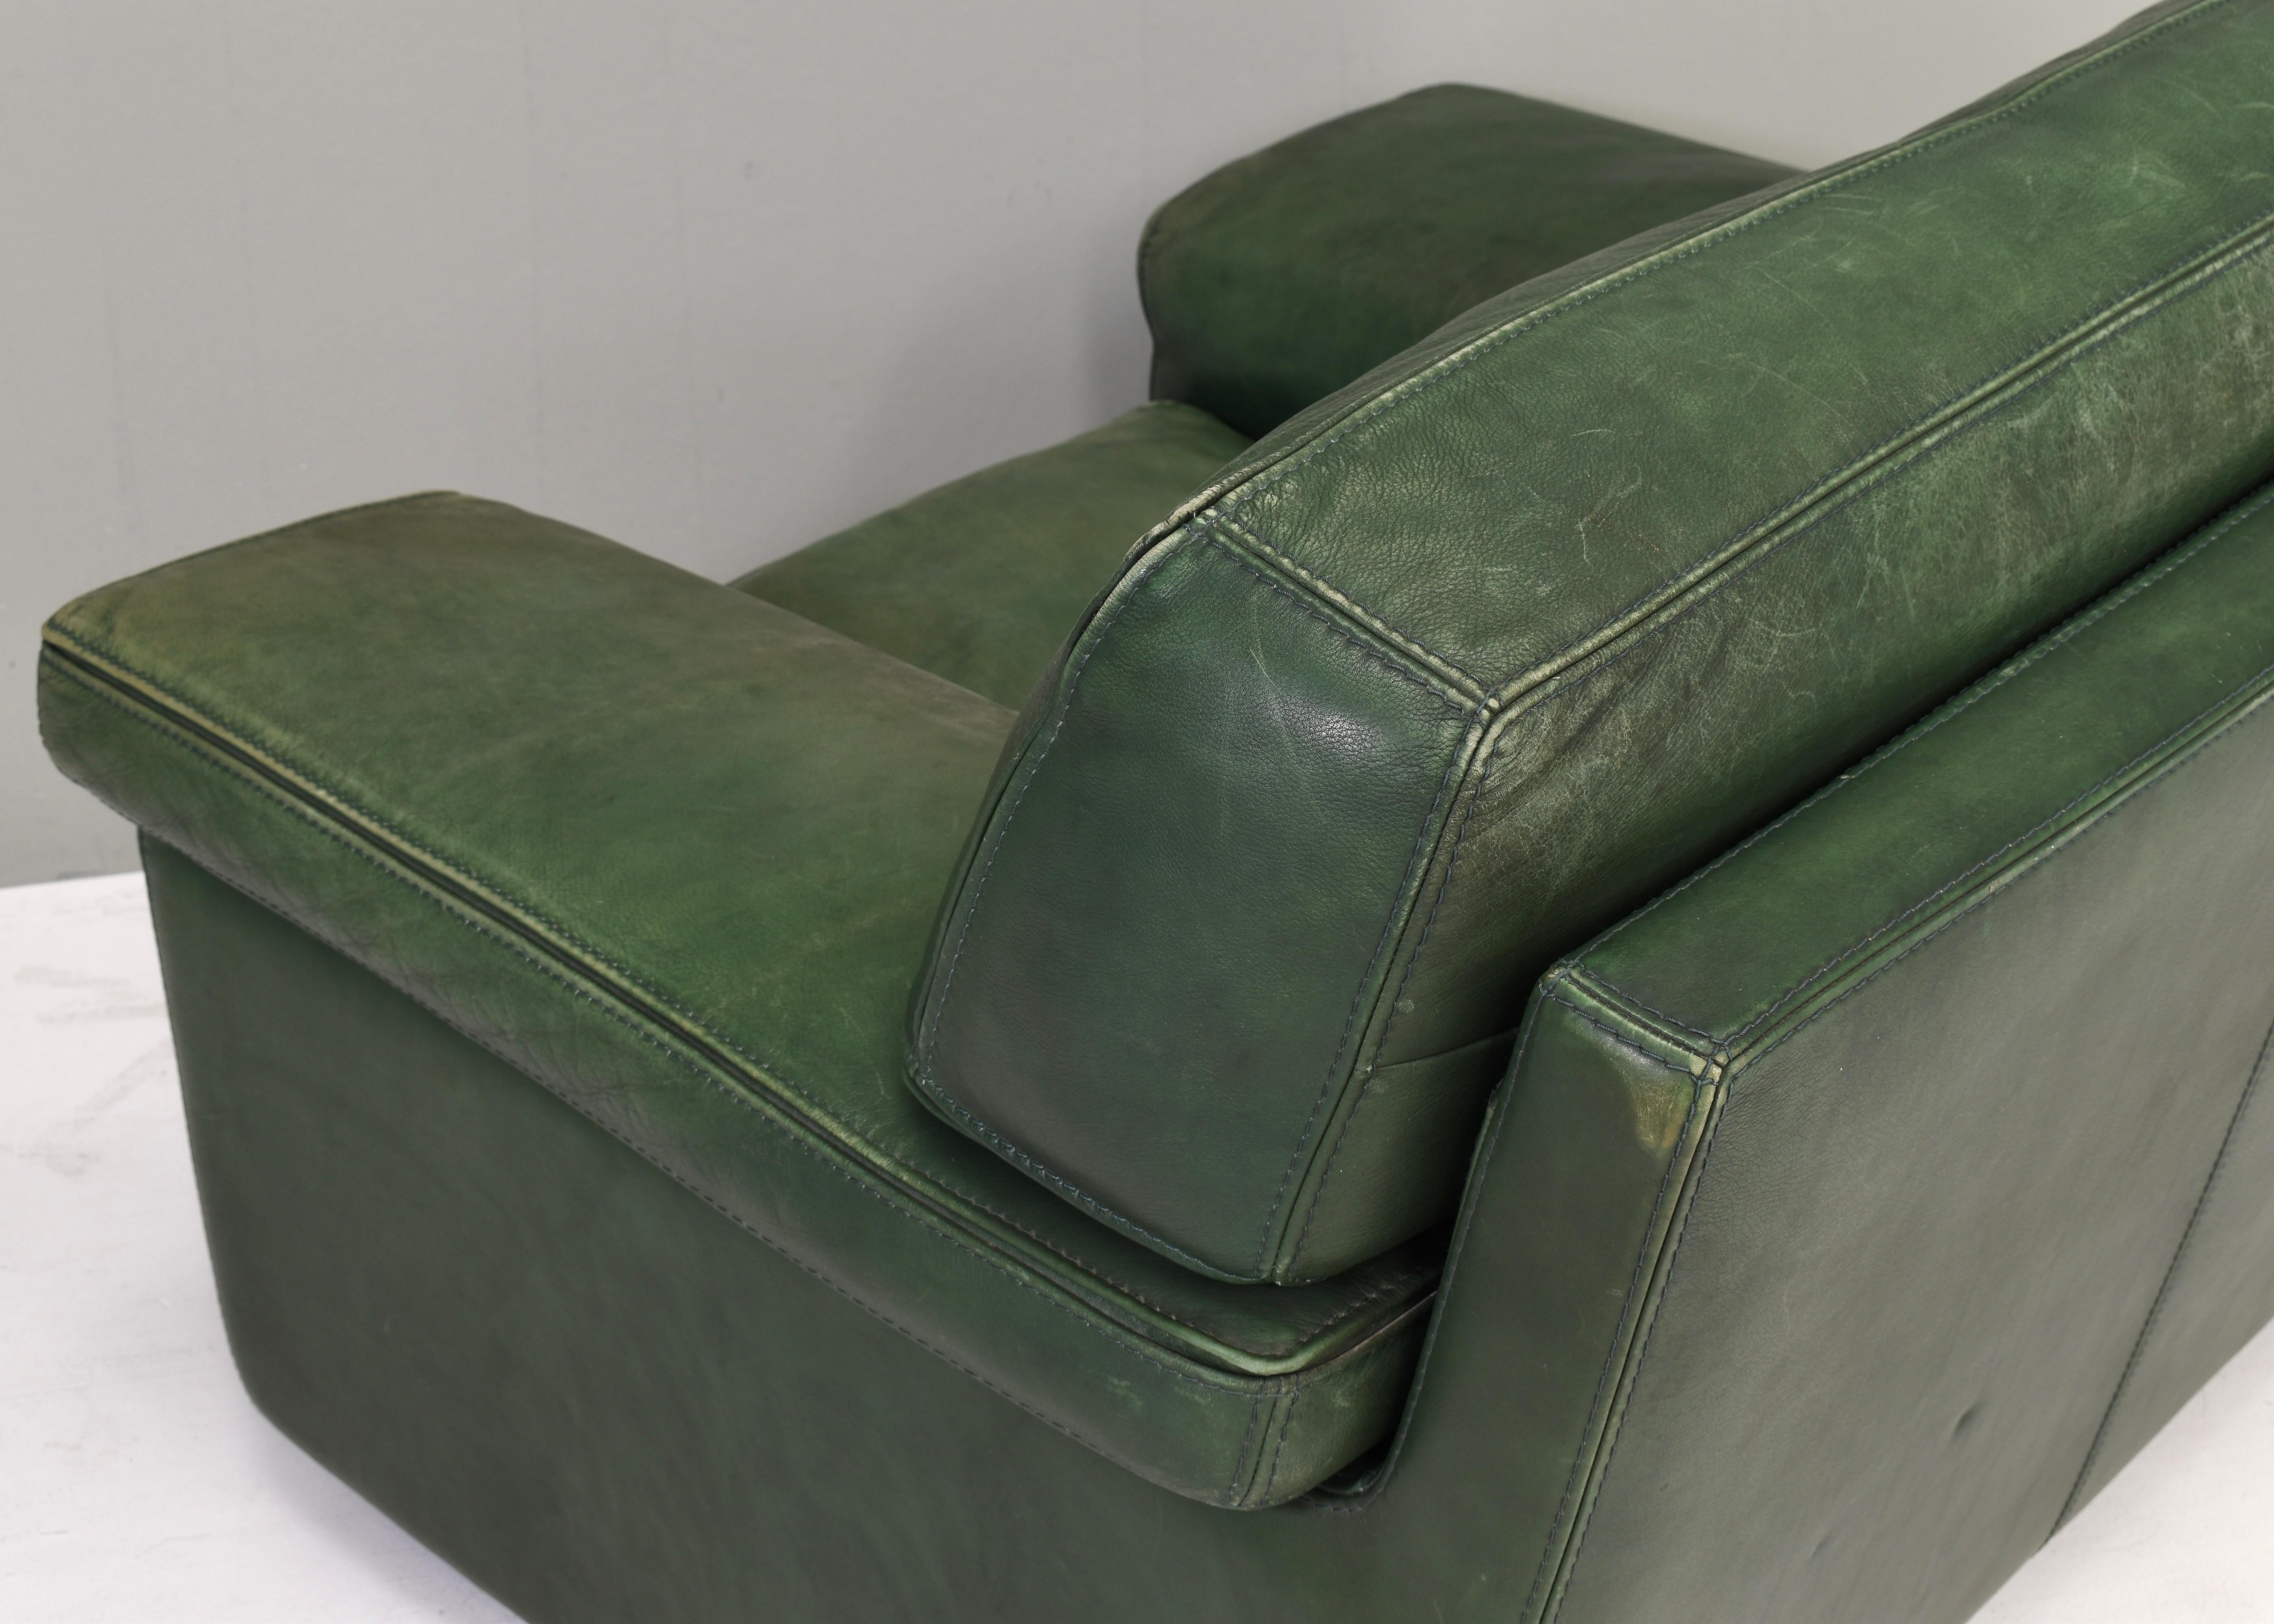 Roche Bobois Lounge Armchair in Original Green Patinated Leather – circa 1970 For Sale 9